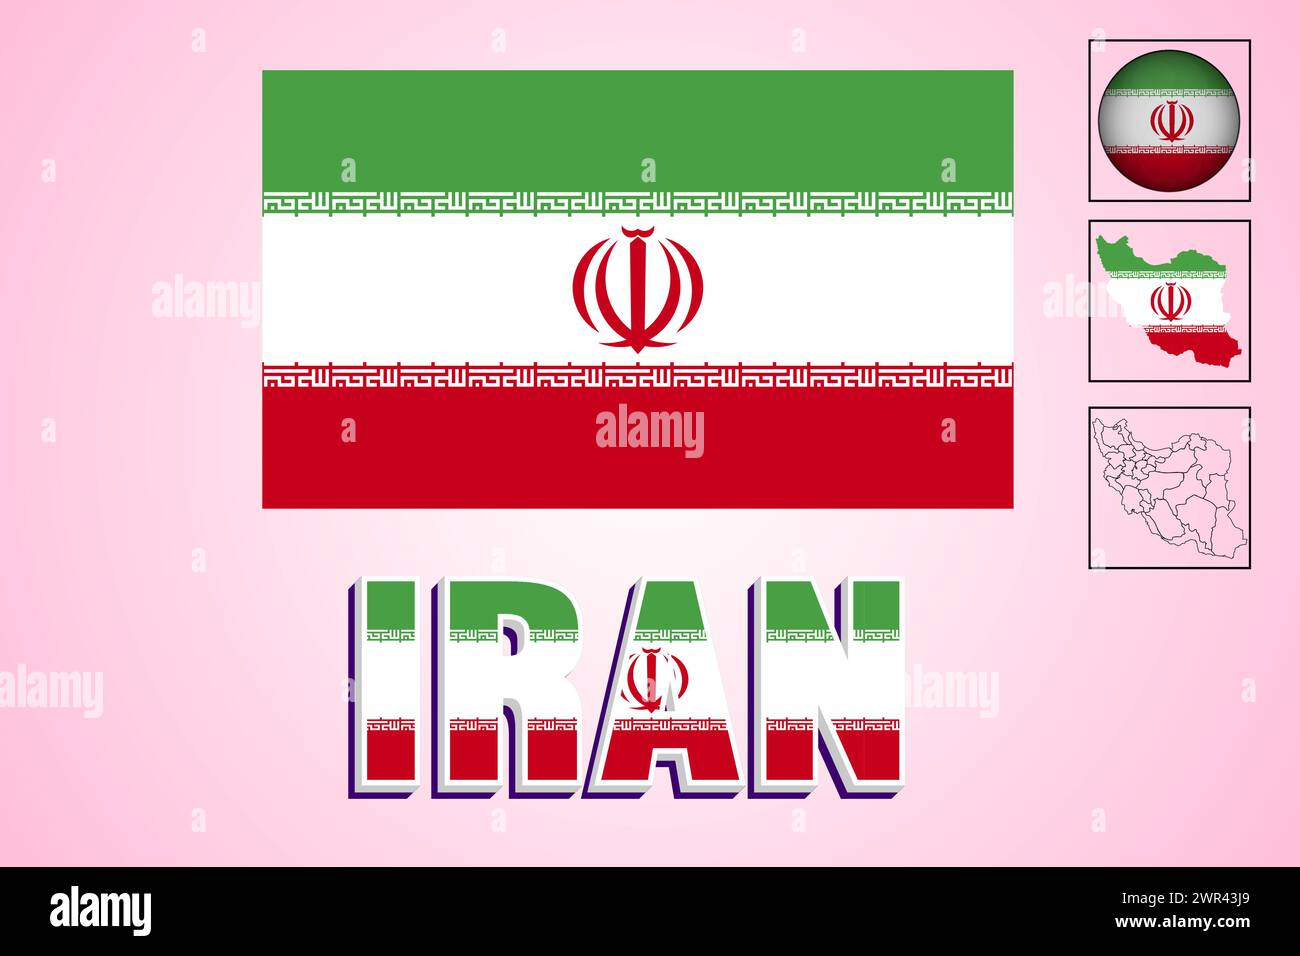 Iran flag and map in vector illustration Stock Vector